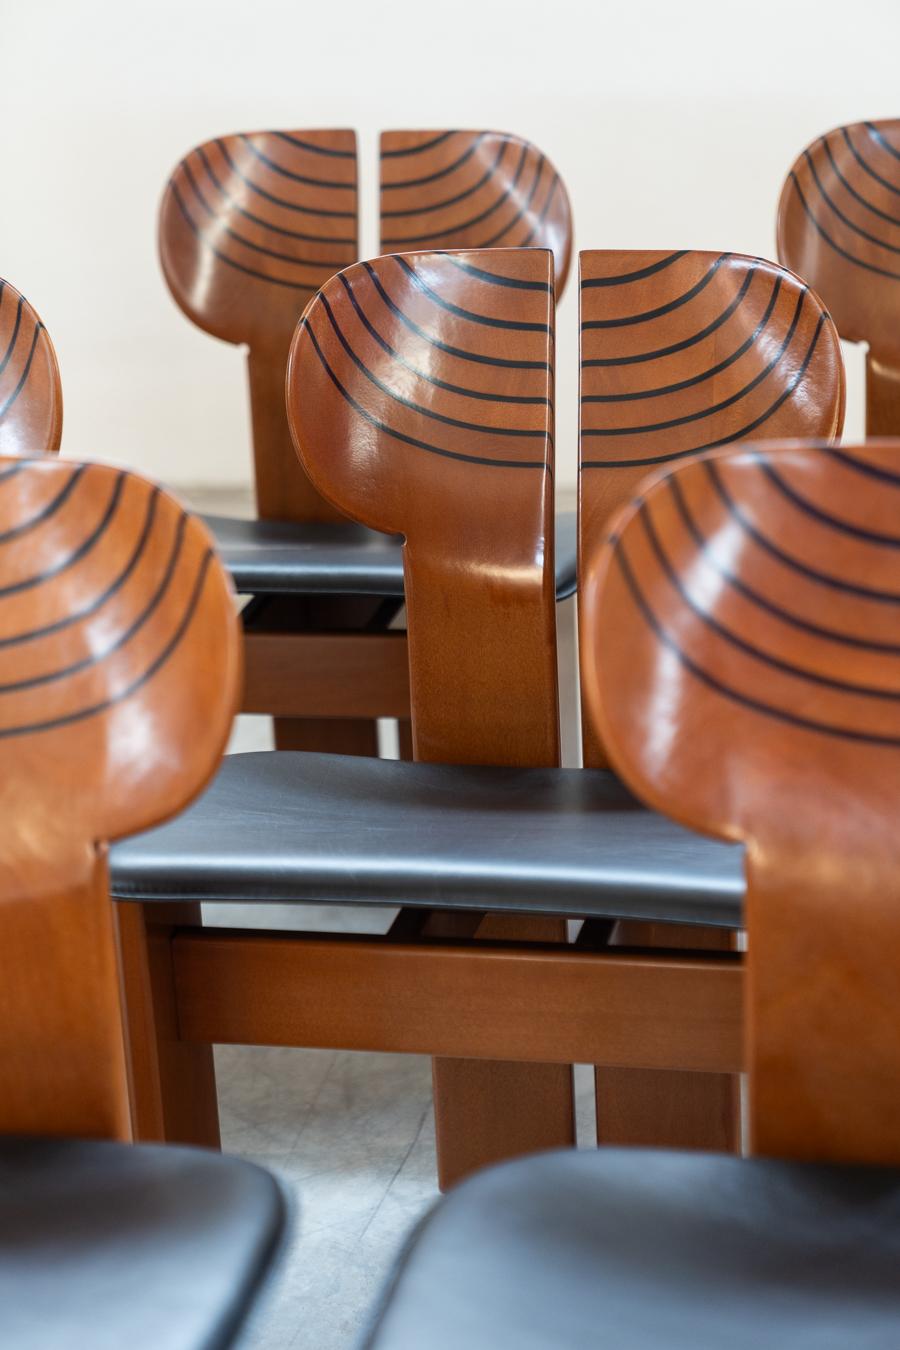 Set 12 chairs Afra & Tobia Scarpa mod. Africa - Gruppo Unico, 80/90 For Sale 1